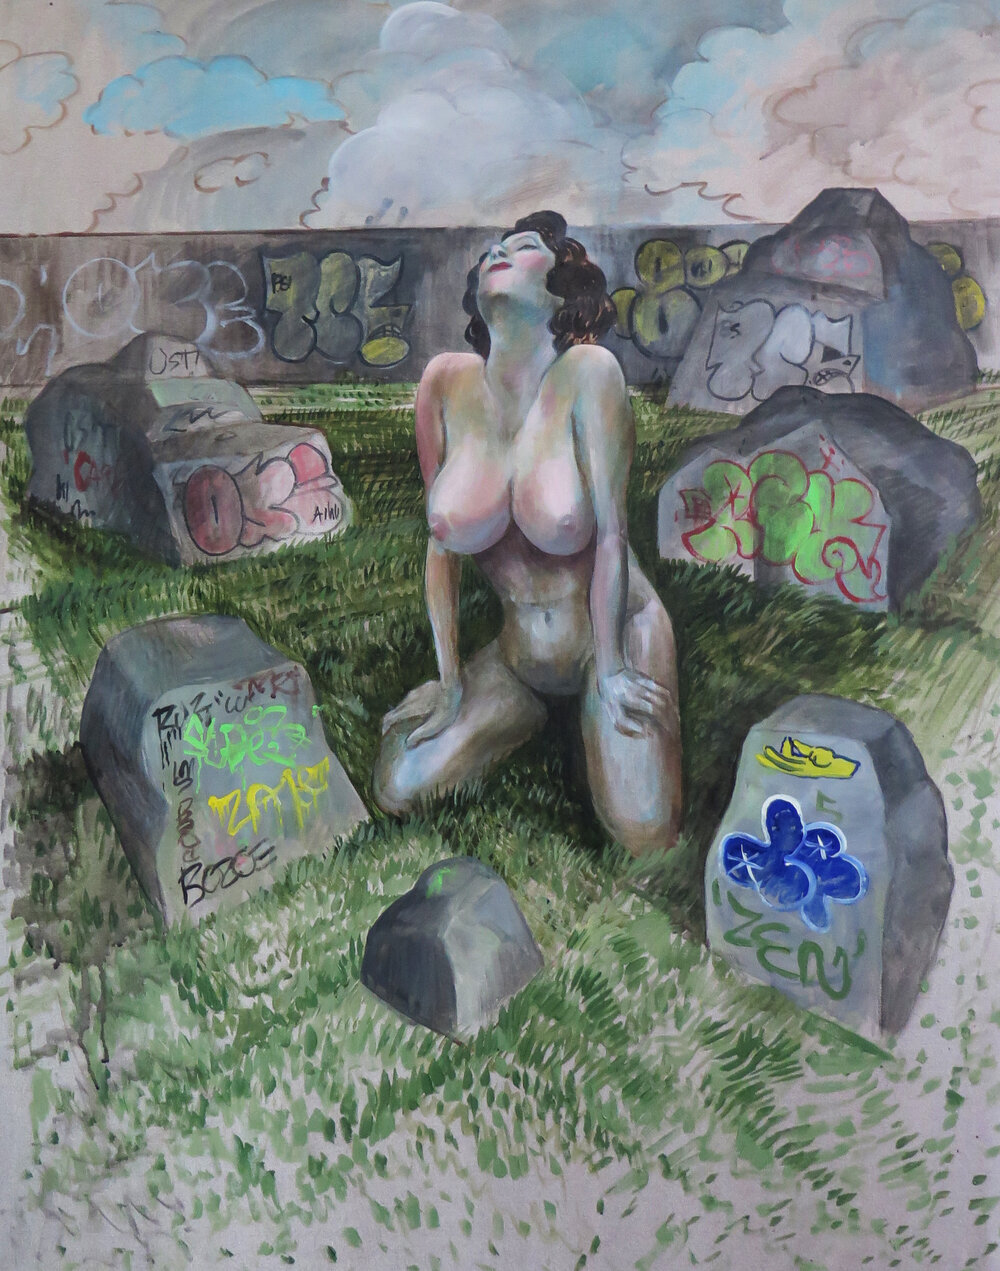 Image+3+Noah+Becker,+Woman+in+a+Landscape,+2019.+Acrylic+on+canvas,+48+by+36+inches.+Courtesy+of+the+artist..jpg